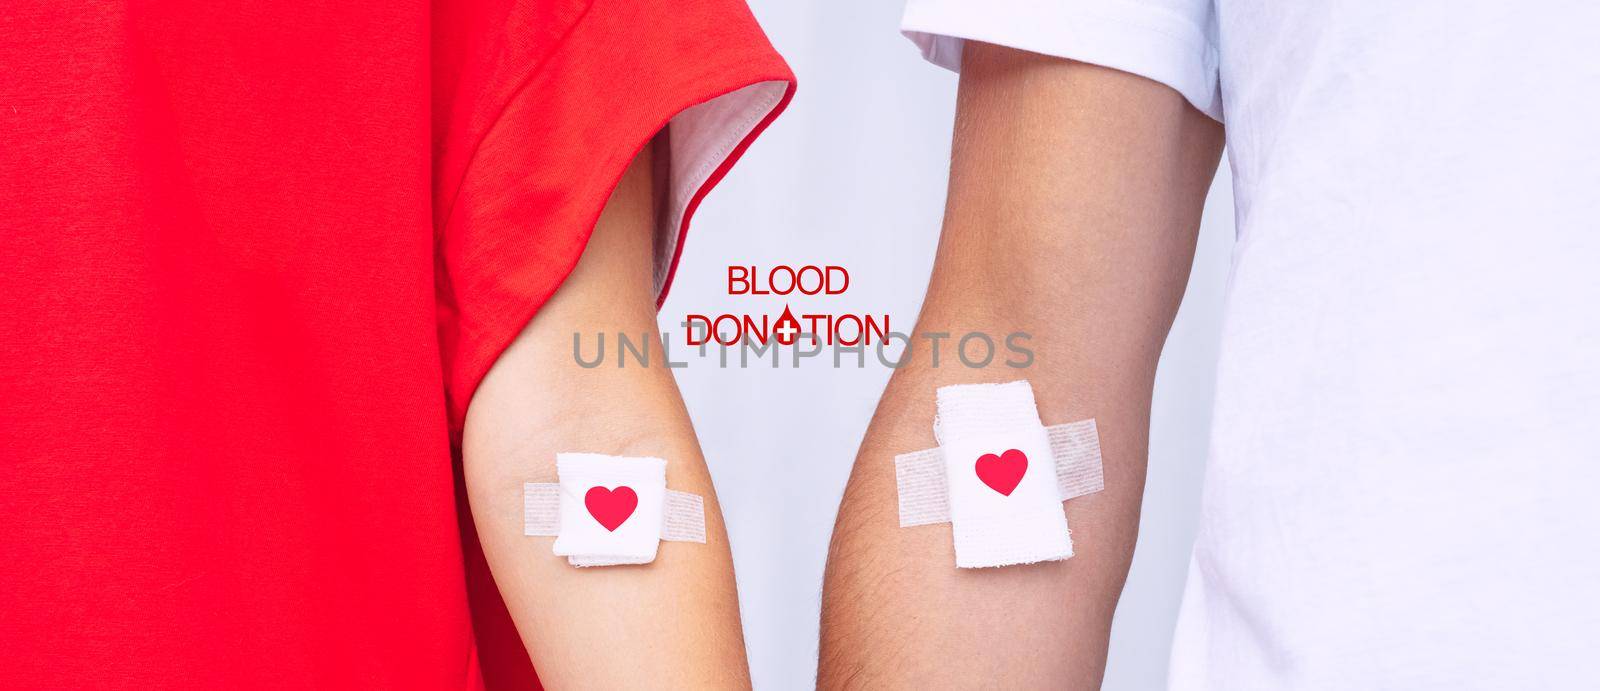 Blood donors with bandage after giving blood. Blood donation, save lives. World blood donor day concept by DariaKulkova